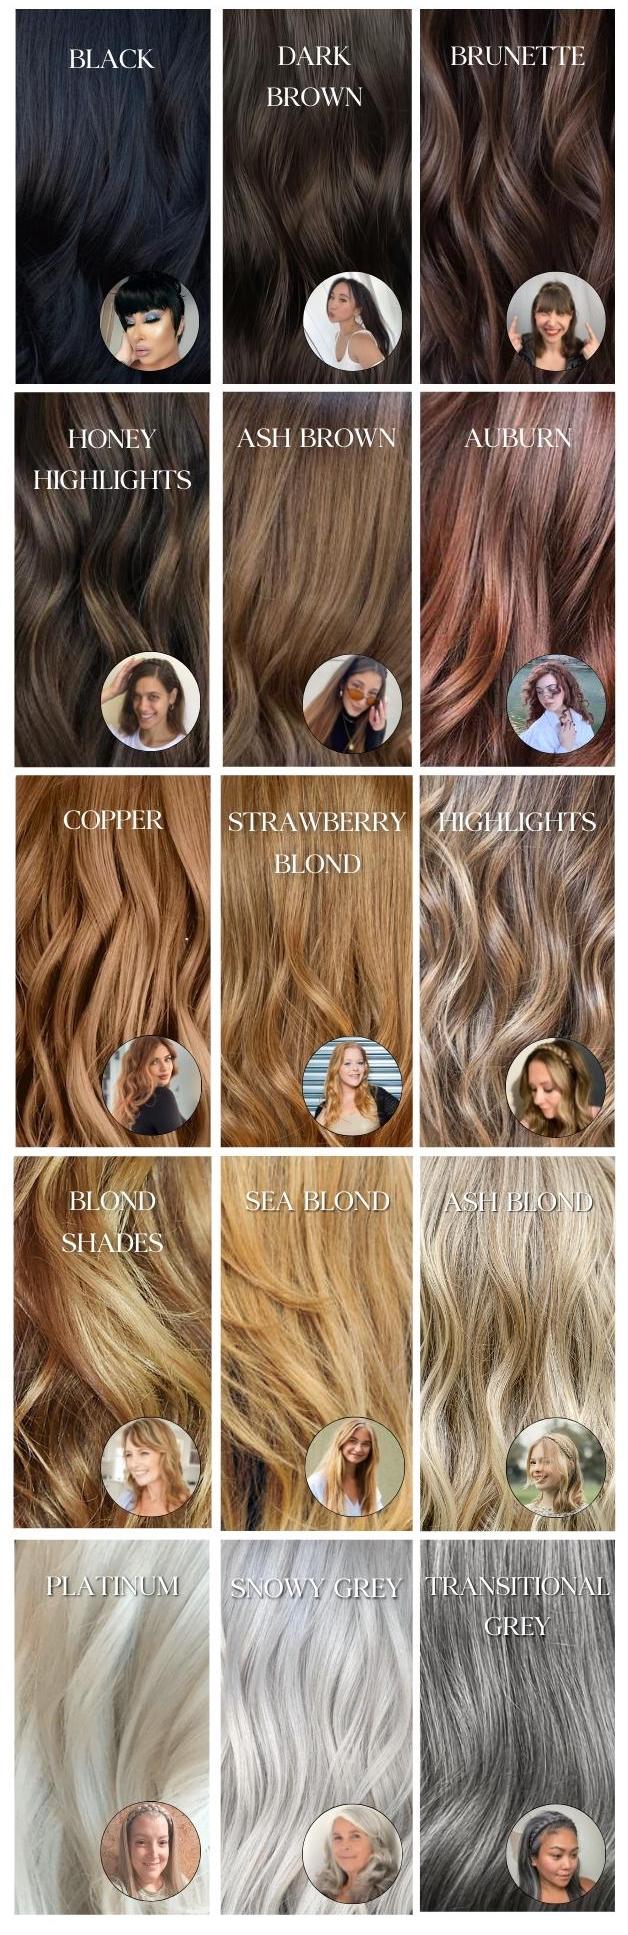 3 Easy Ways to Read a Hair Color Chart  wikiHow